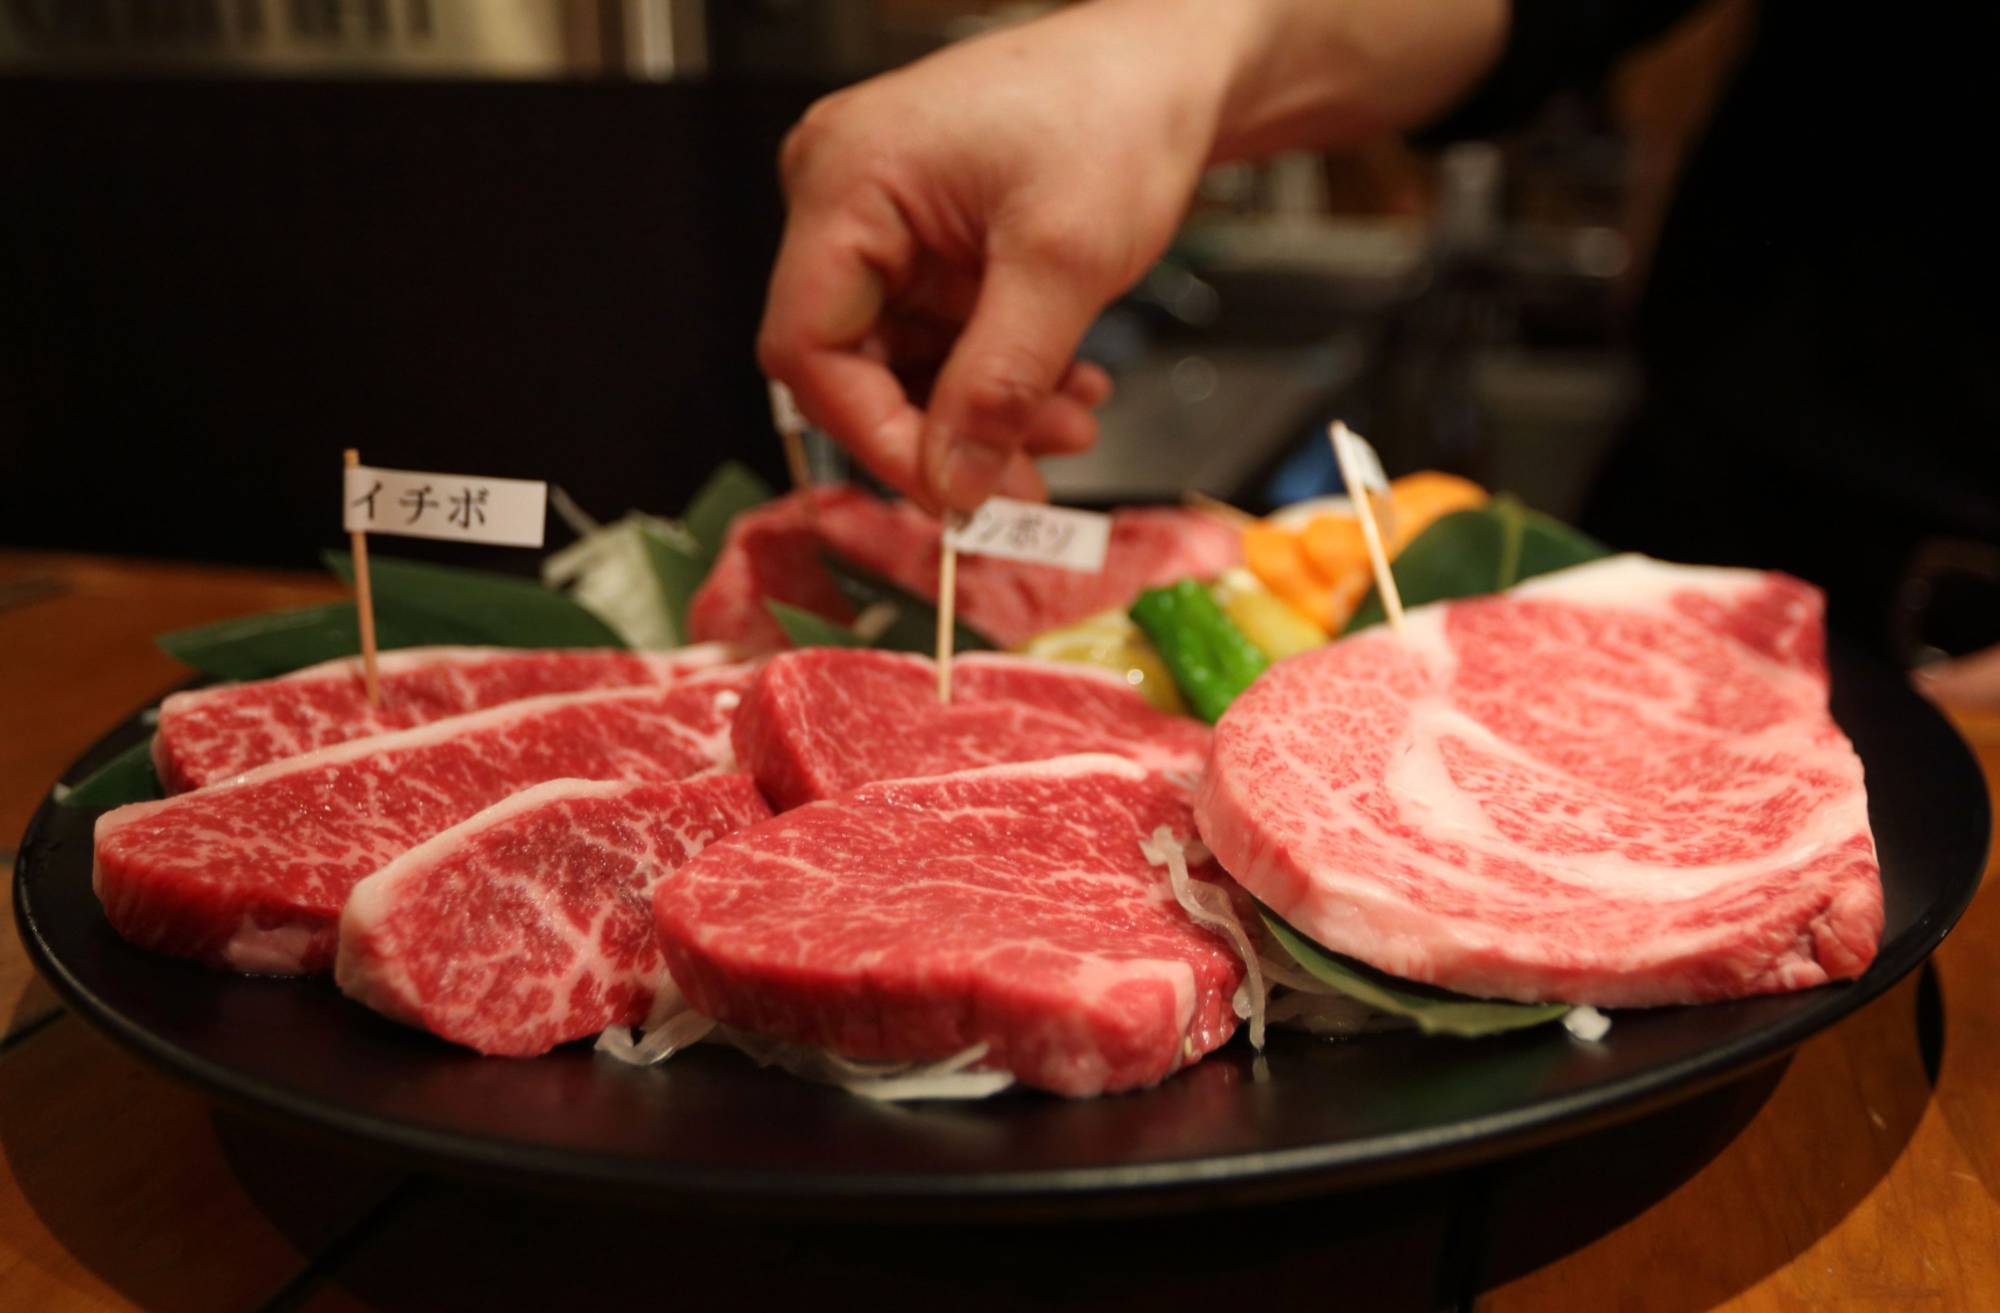 What Japan's iconic beef can teach us about 'soft power' - The Japan Times